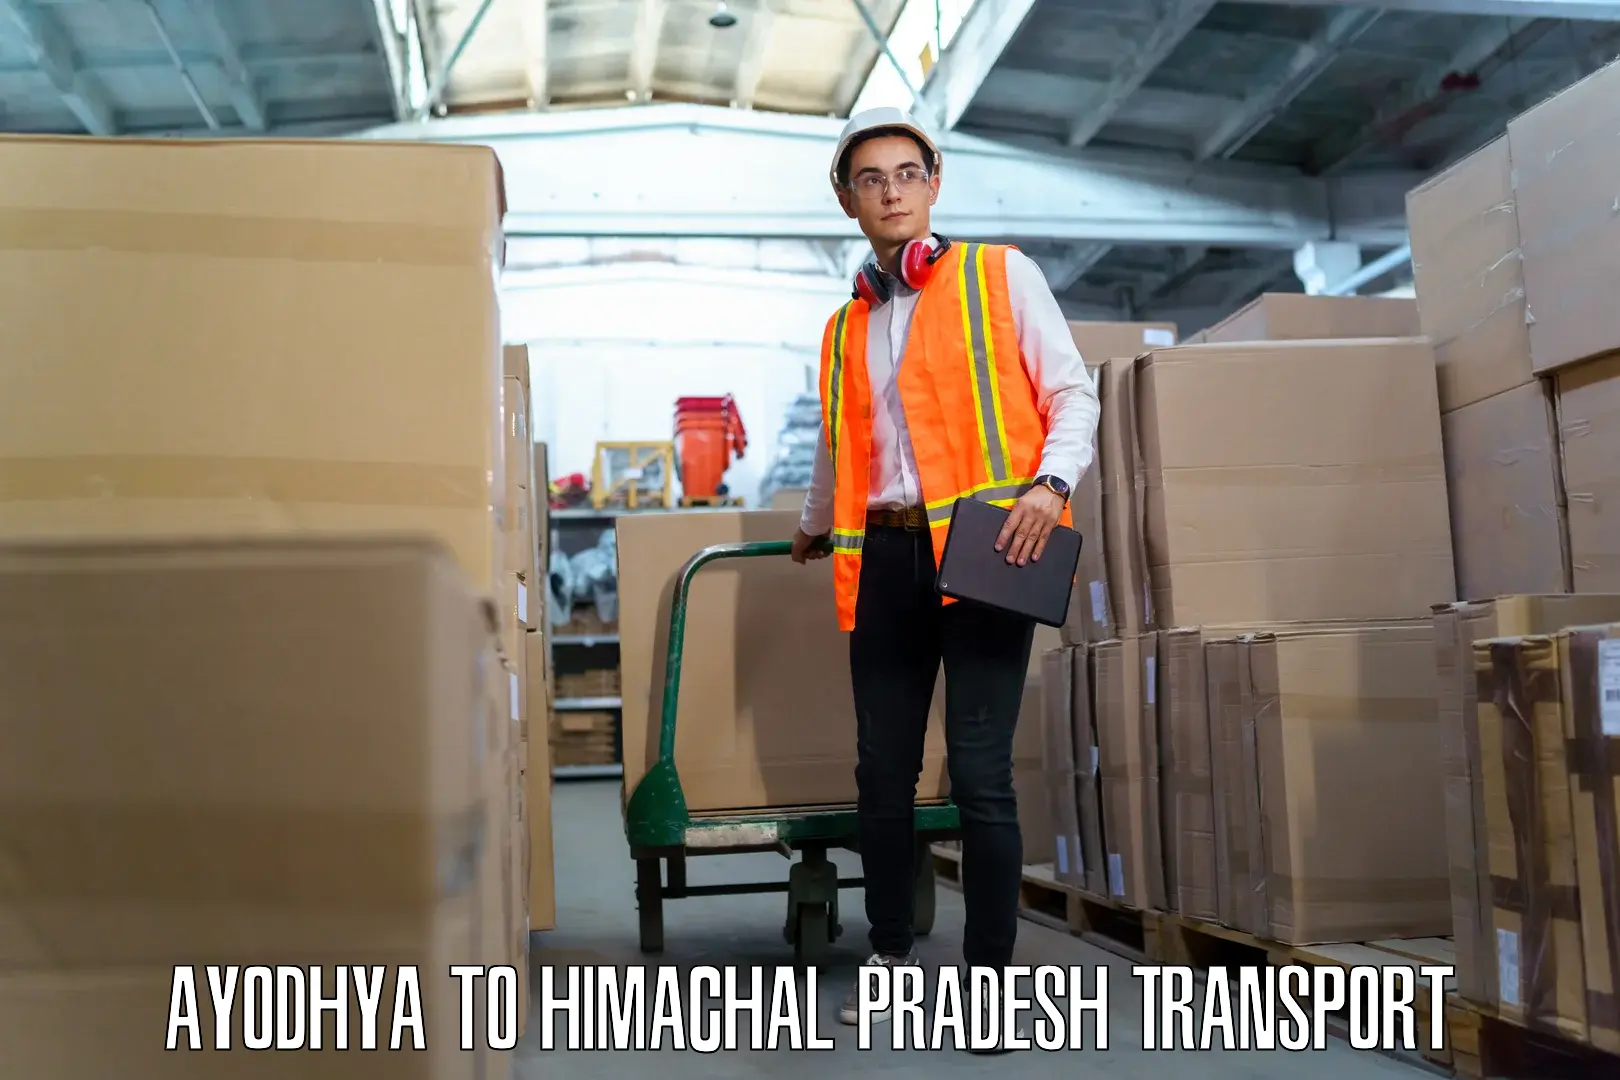 Domestic goods transportation services Ayodhya to Dheera